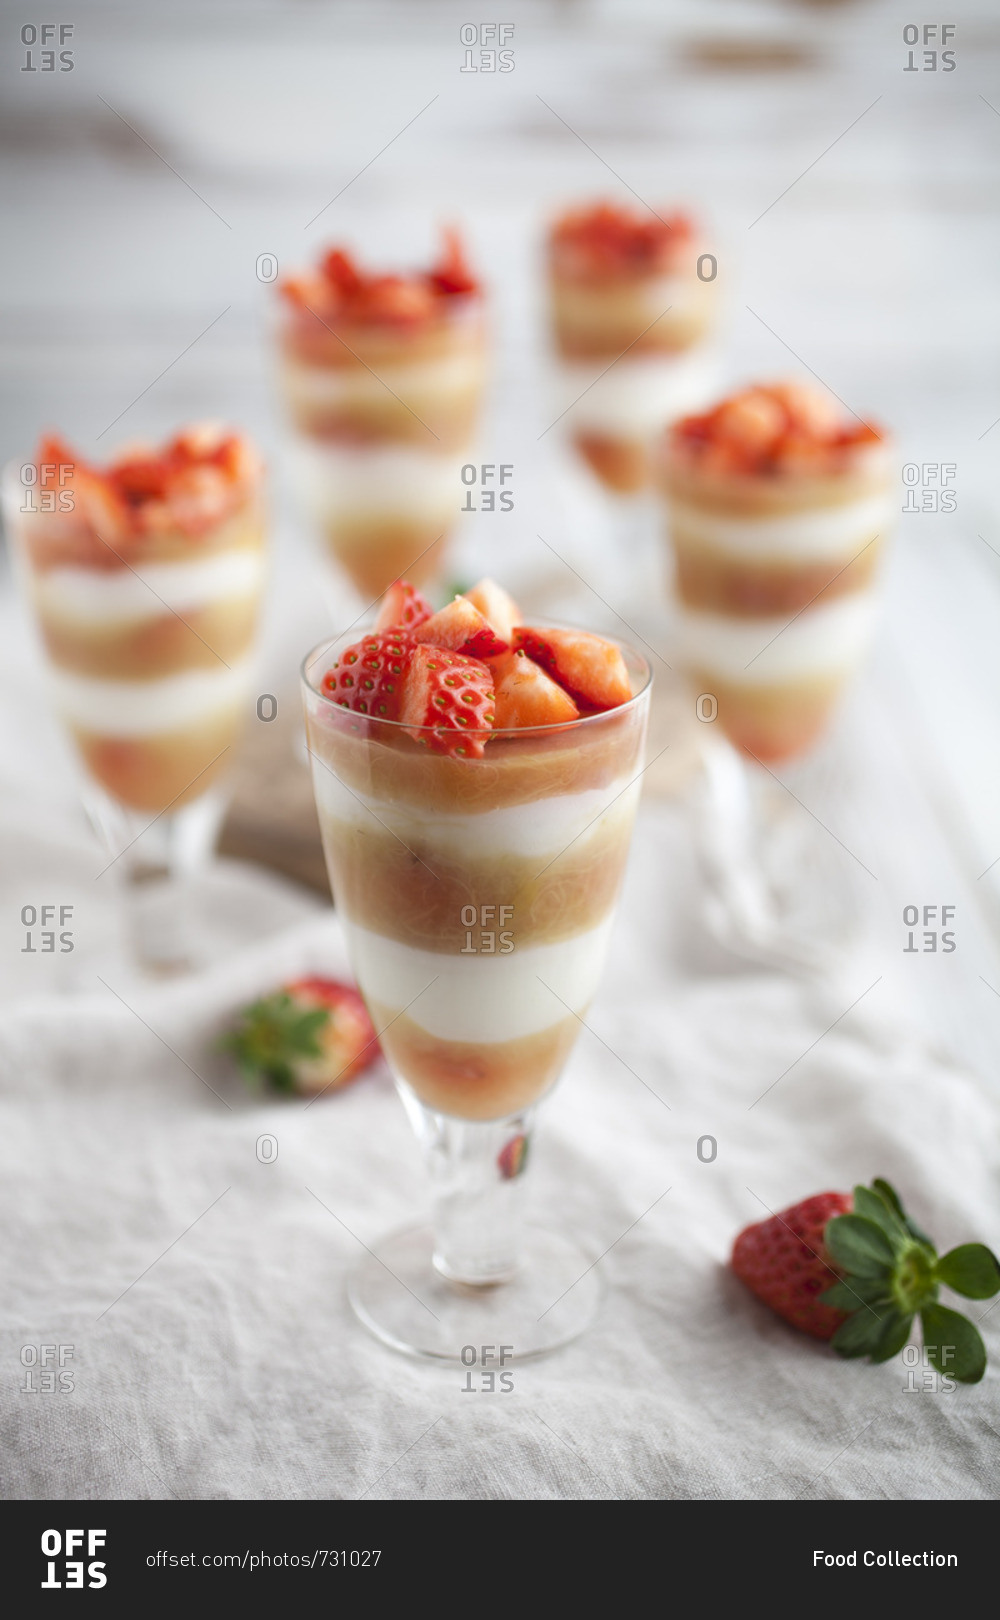 Creamy layered desserts with strawberries and rhubarb